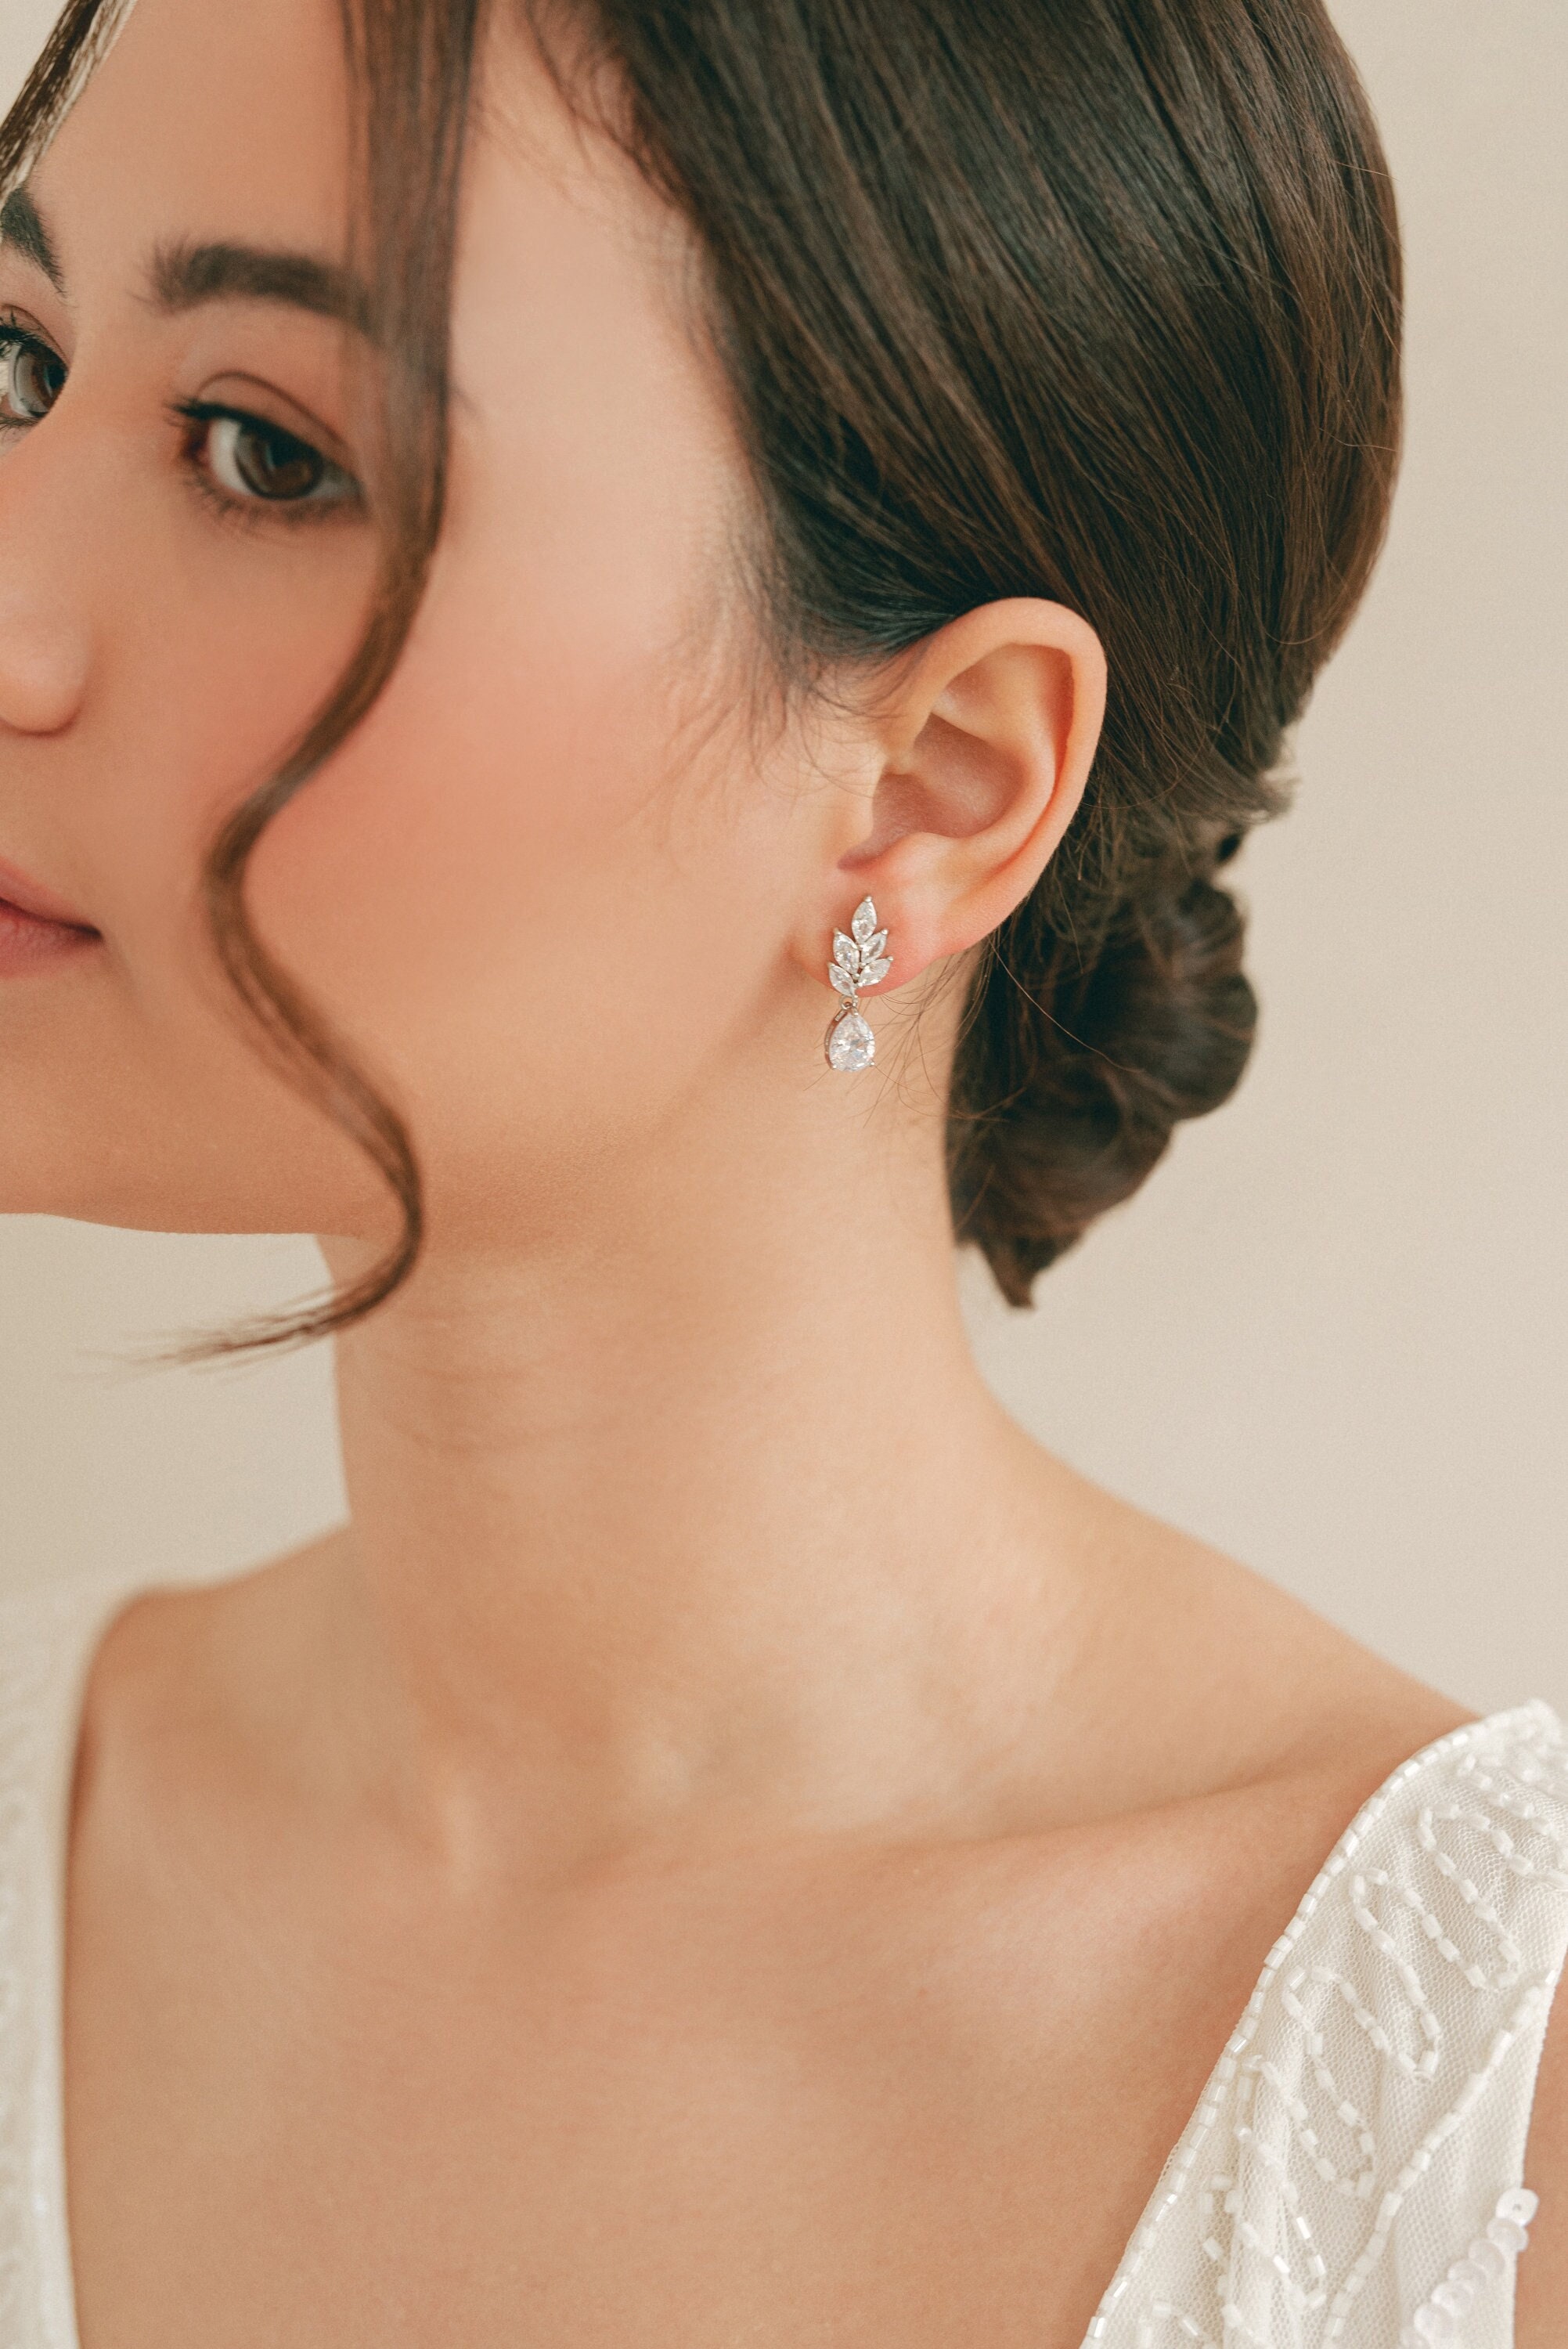 8 Pretty Bridal Earrings to Wear on Your Wedding Day  Kayleigh Pope wedding  photographer